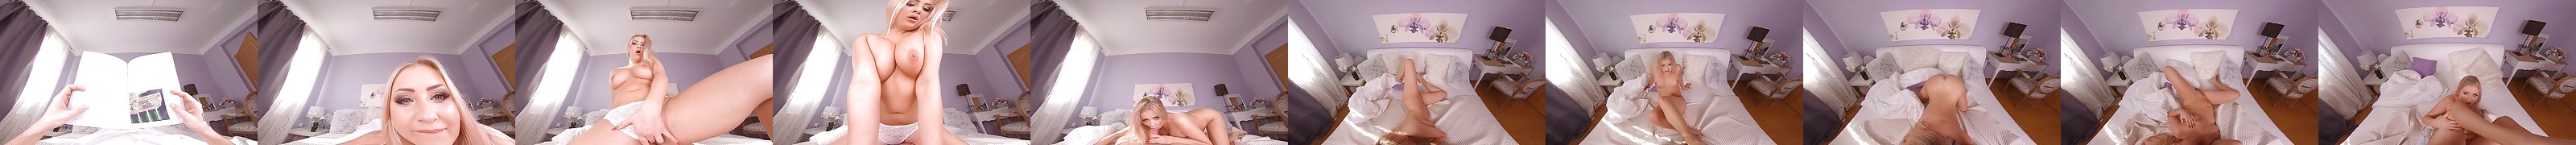 Featured Hot Girl Vr Porn Videos Xhamster